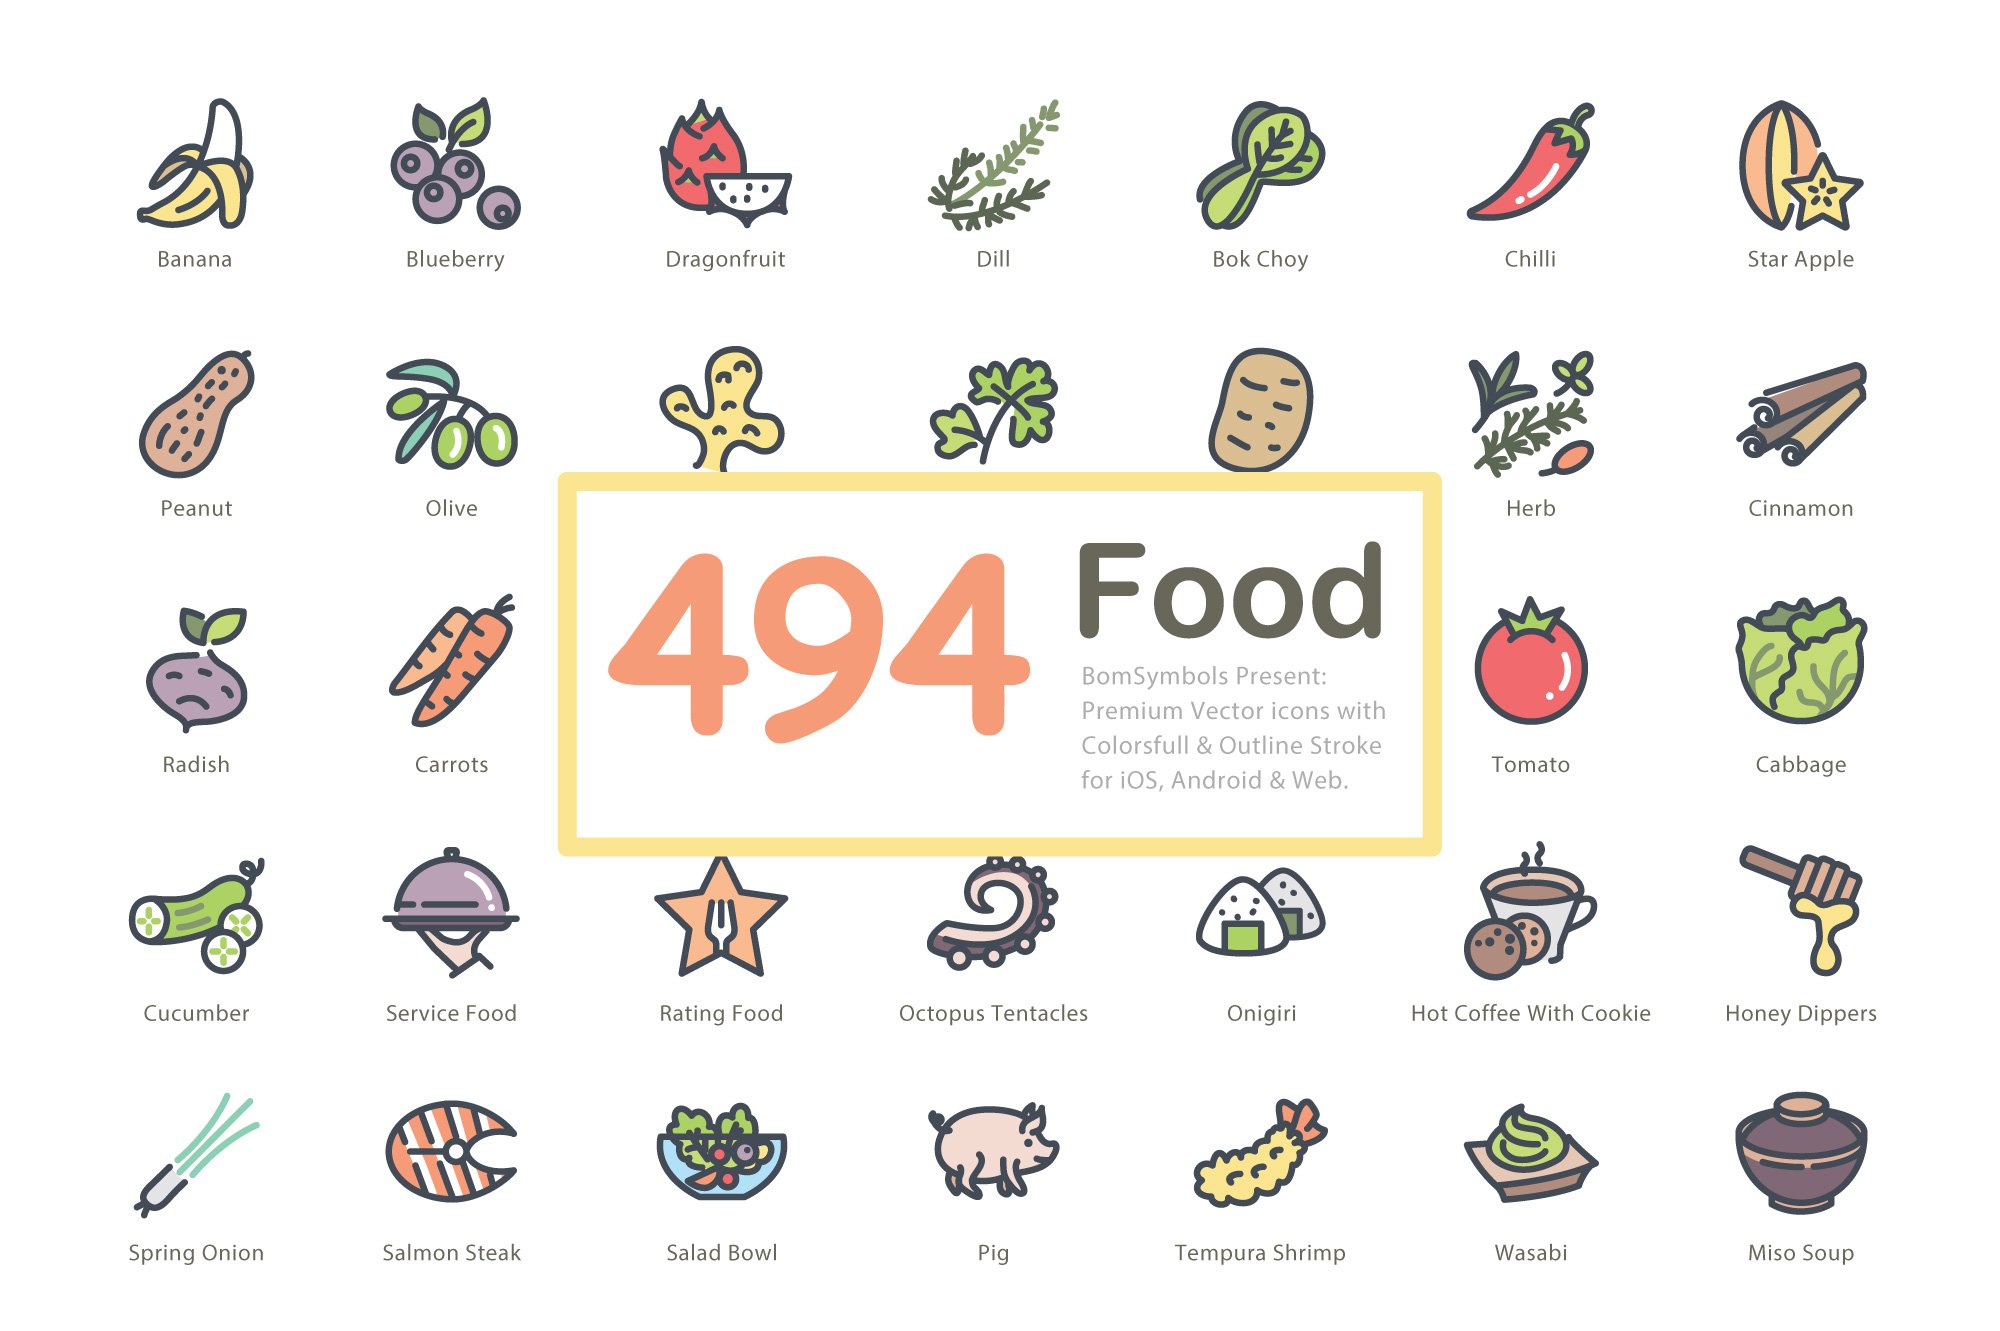 Food Vector Icons cover image.